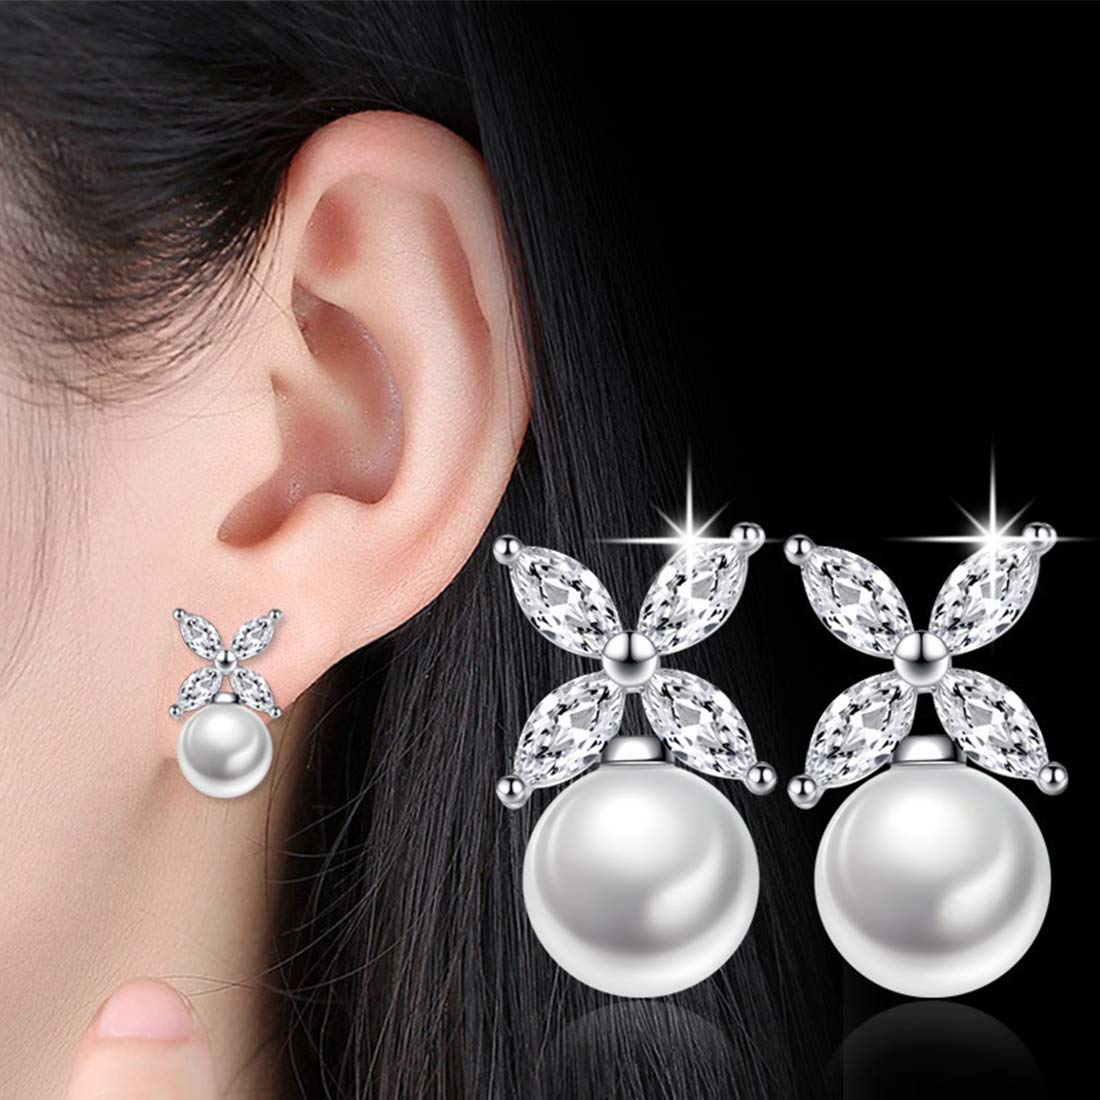 Yellow Chimes A5 Grade Crystal Stylish Latest Formal Casual Wear Evergreen White Pearl Studs Silver Plated Stud Earrings for Women and Girls (Floral Crystal)